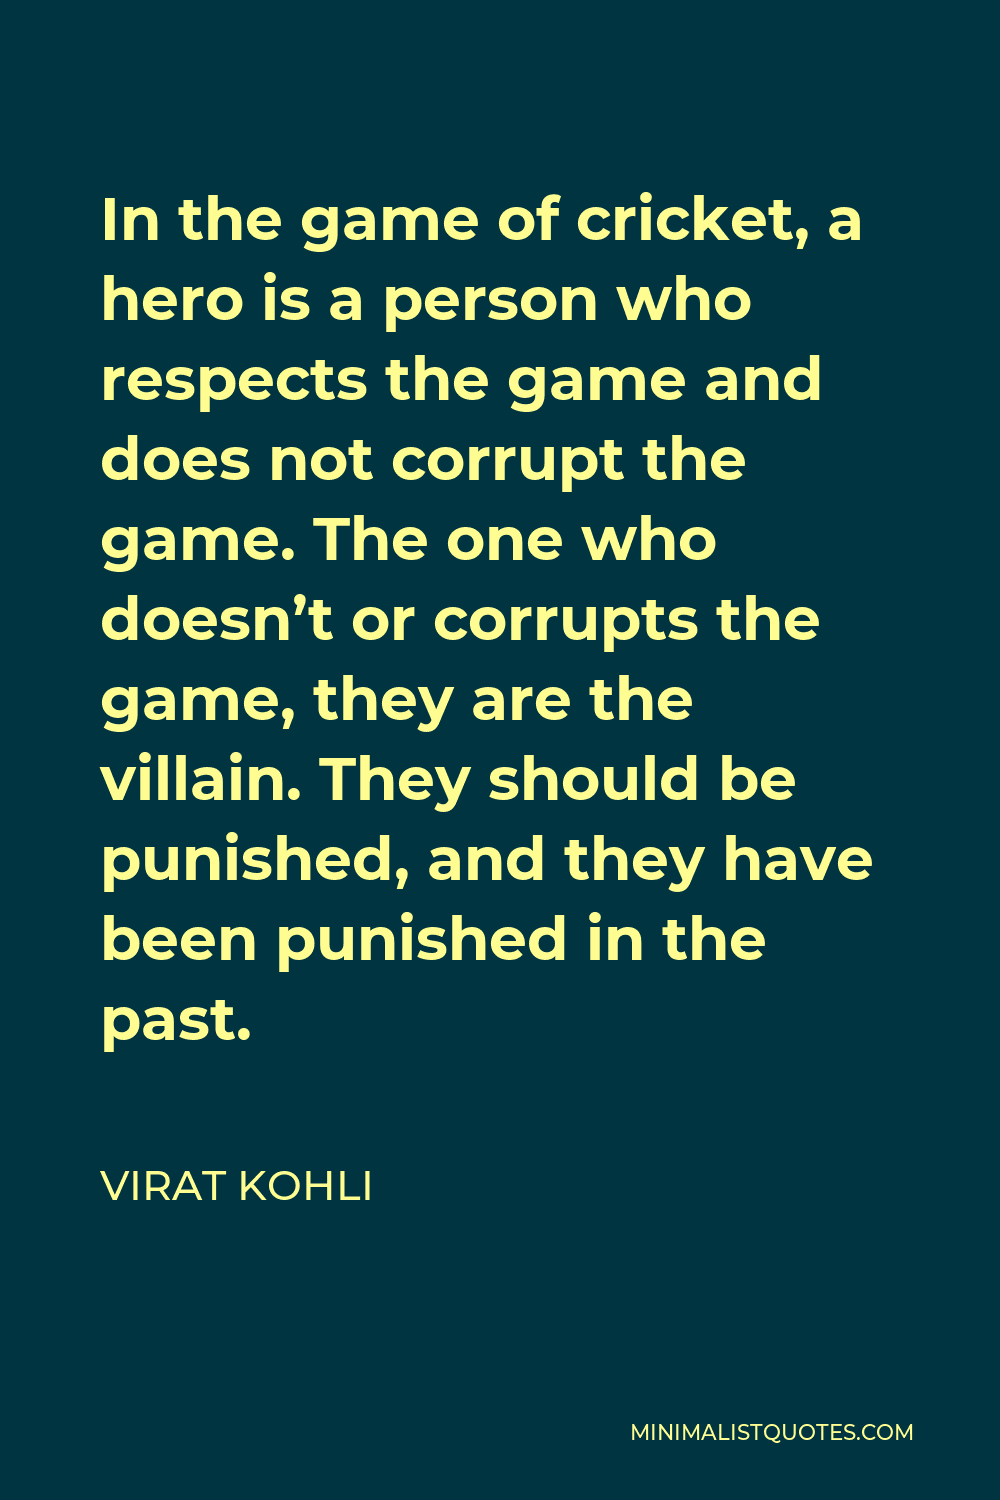 Virat Kohli Quote - In the game of cricket, a hero is a person who respects the game and does not corrupt the game. The one who doesn’t or corrupts the game, they are the villain. They should be punished, and they have been punished in the past.